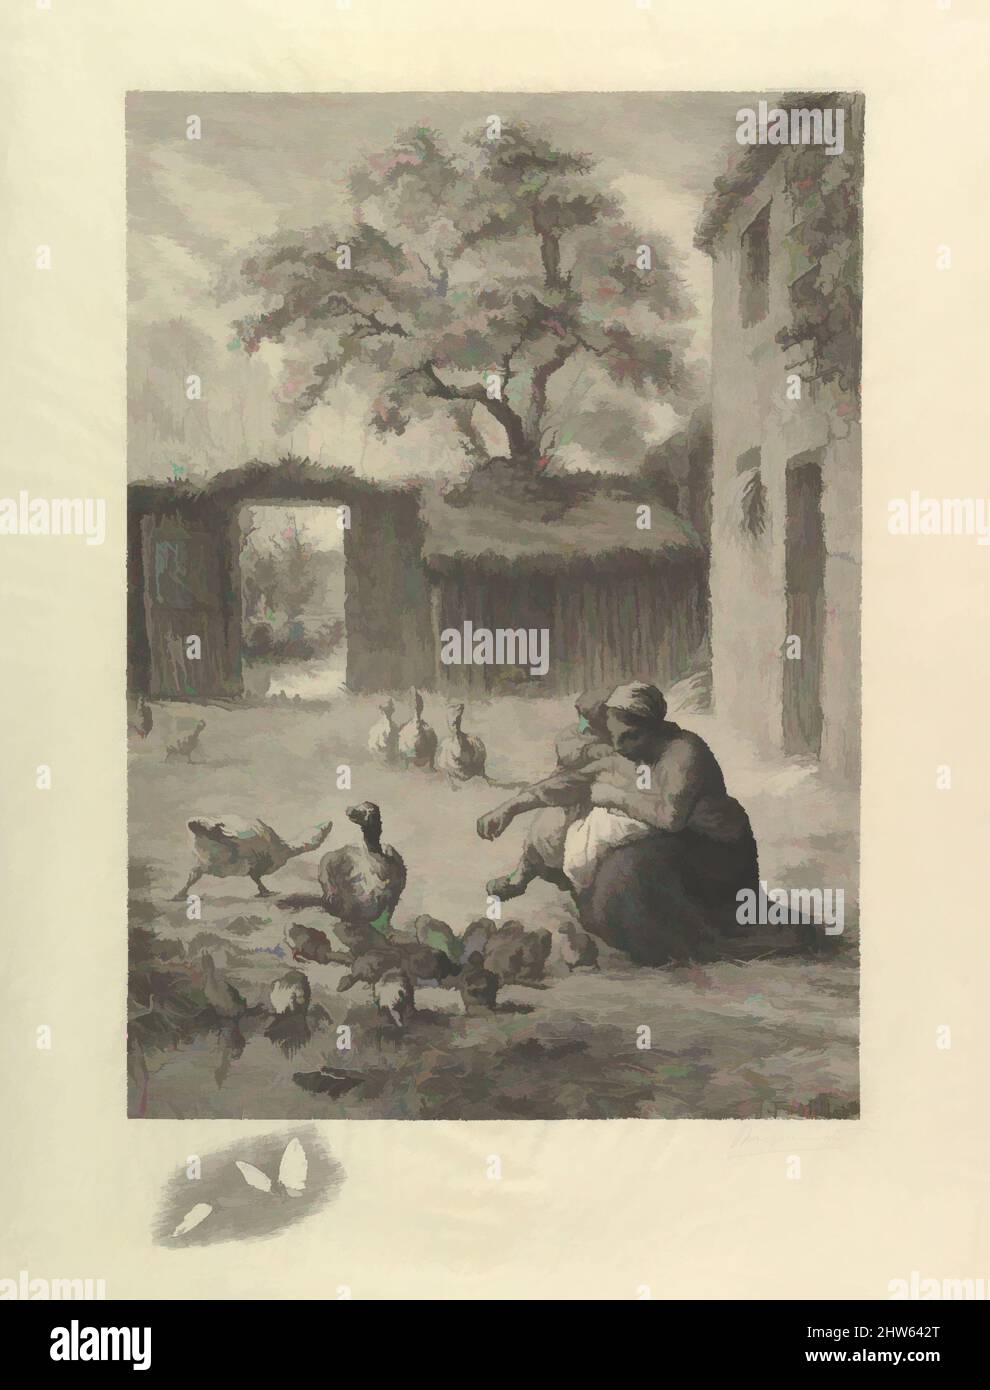 Art inspired by Spring, after a pastel by Millet, 1887, Etching; ninth state of nine, sheet: 25 3/4 x 19 1/2 in. (65.4 x 49.5 cm), Prints, After Jean-François Millet (French, Gruchy 1814–1875 Barbizon), Félix Bracquemond (French, Paris 1833–1914 Sèvres, Classic works modernized by Artotop with a splash of modernity. Shapes, color and value, eye-catching visual impact on art. Emotions through freedom of artworks in a contemporary way. A timeless message pursuing a wildly creative new direction. Artists turning to the digital medium and creating the Artotop NFT Stock Photo